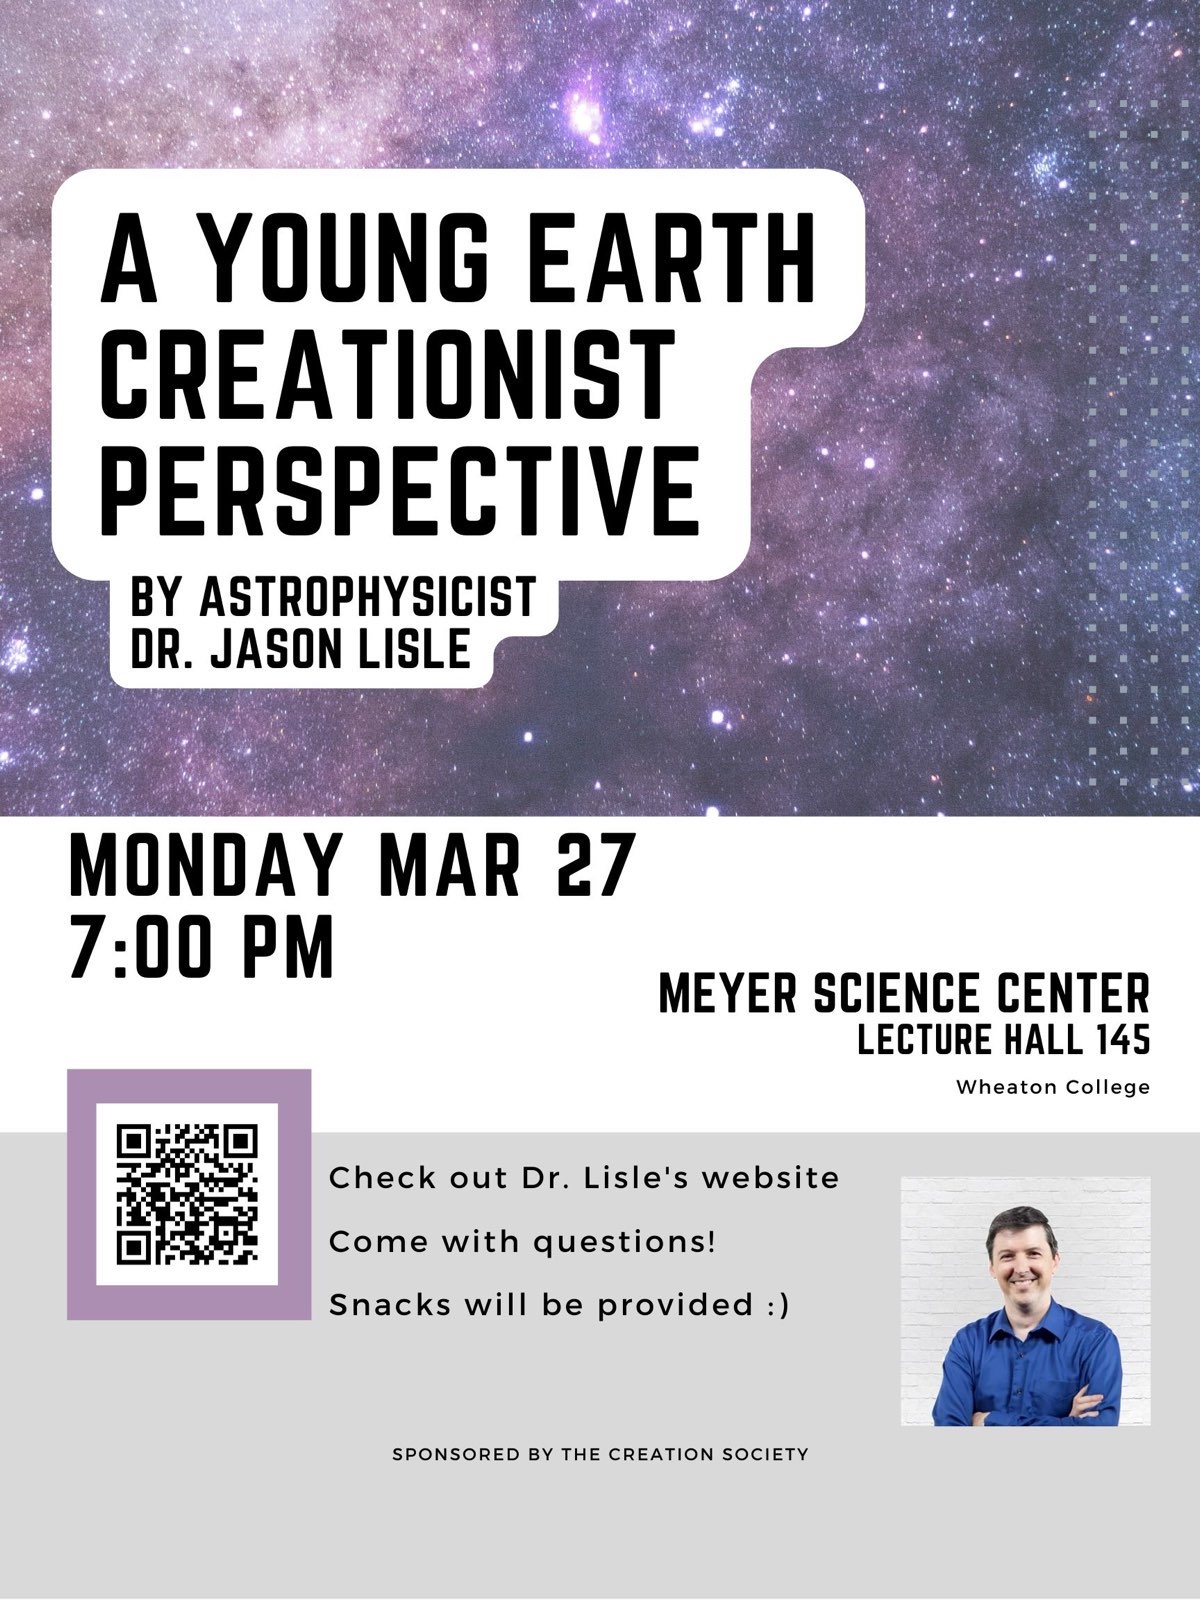 March 27, 7:00 p.m.: A Young Earth Creationist Perspective, with Dr. Jason Lisle. Click for details on sponsor's website